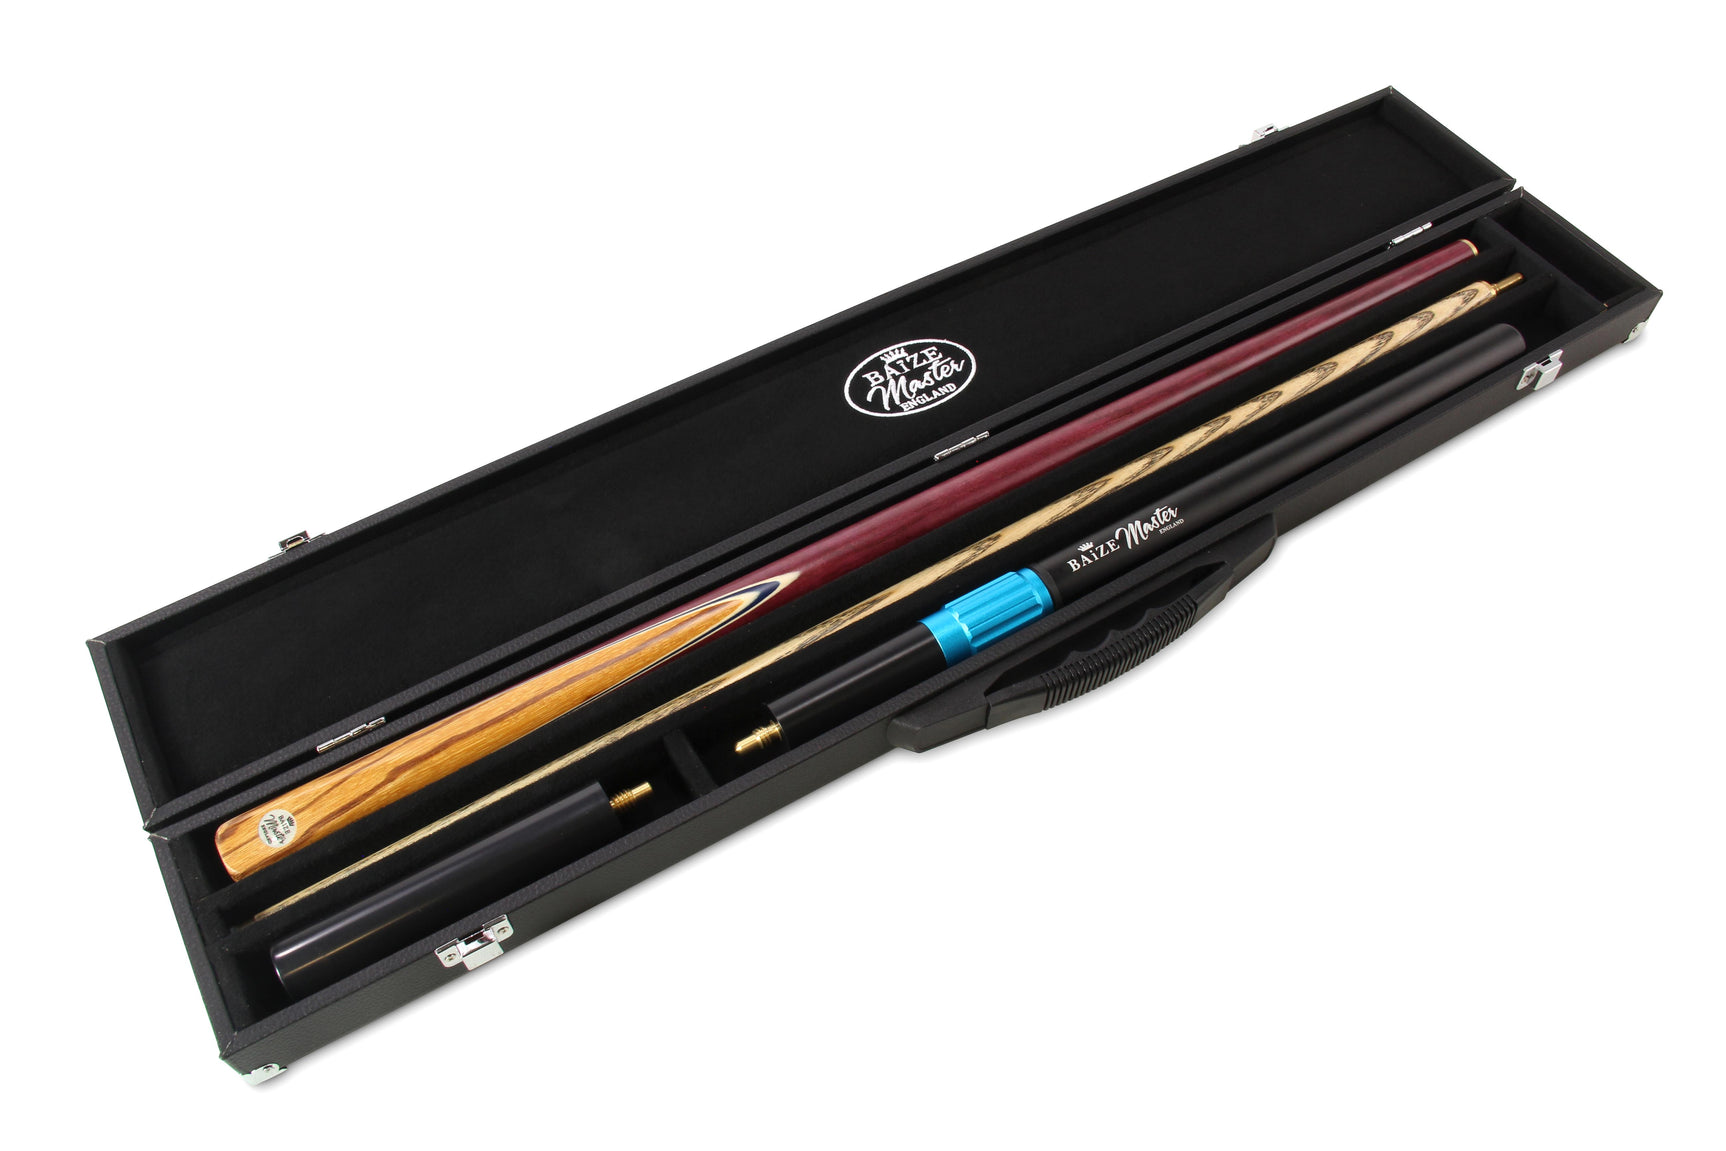 Baize Master House Series 2 Piece Snooker Pool Cue and Case Set 9.5mm Tip